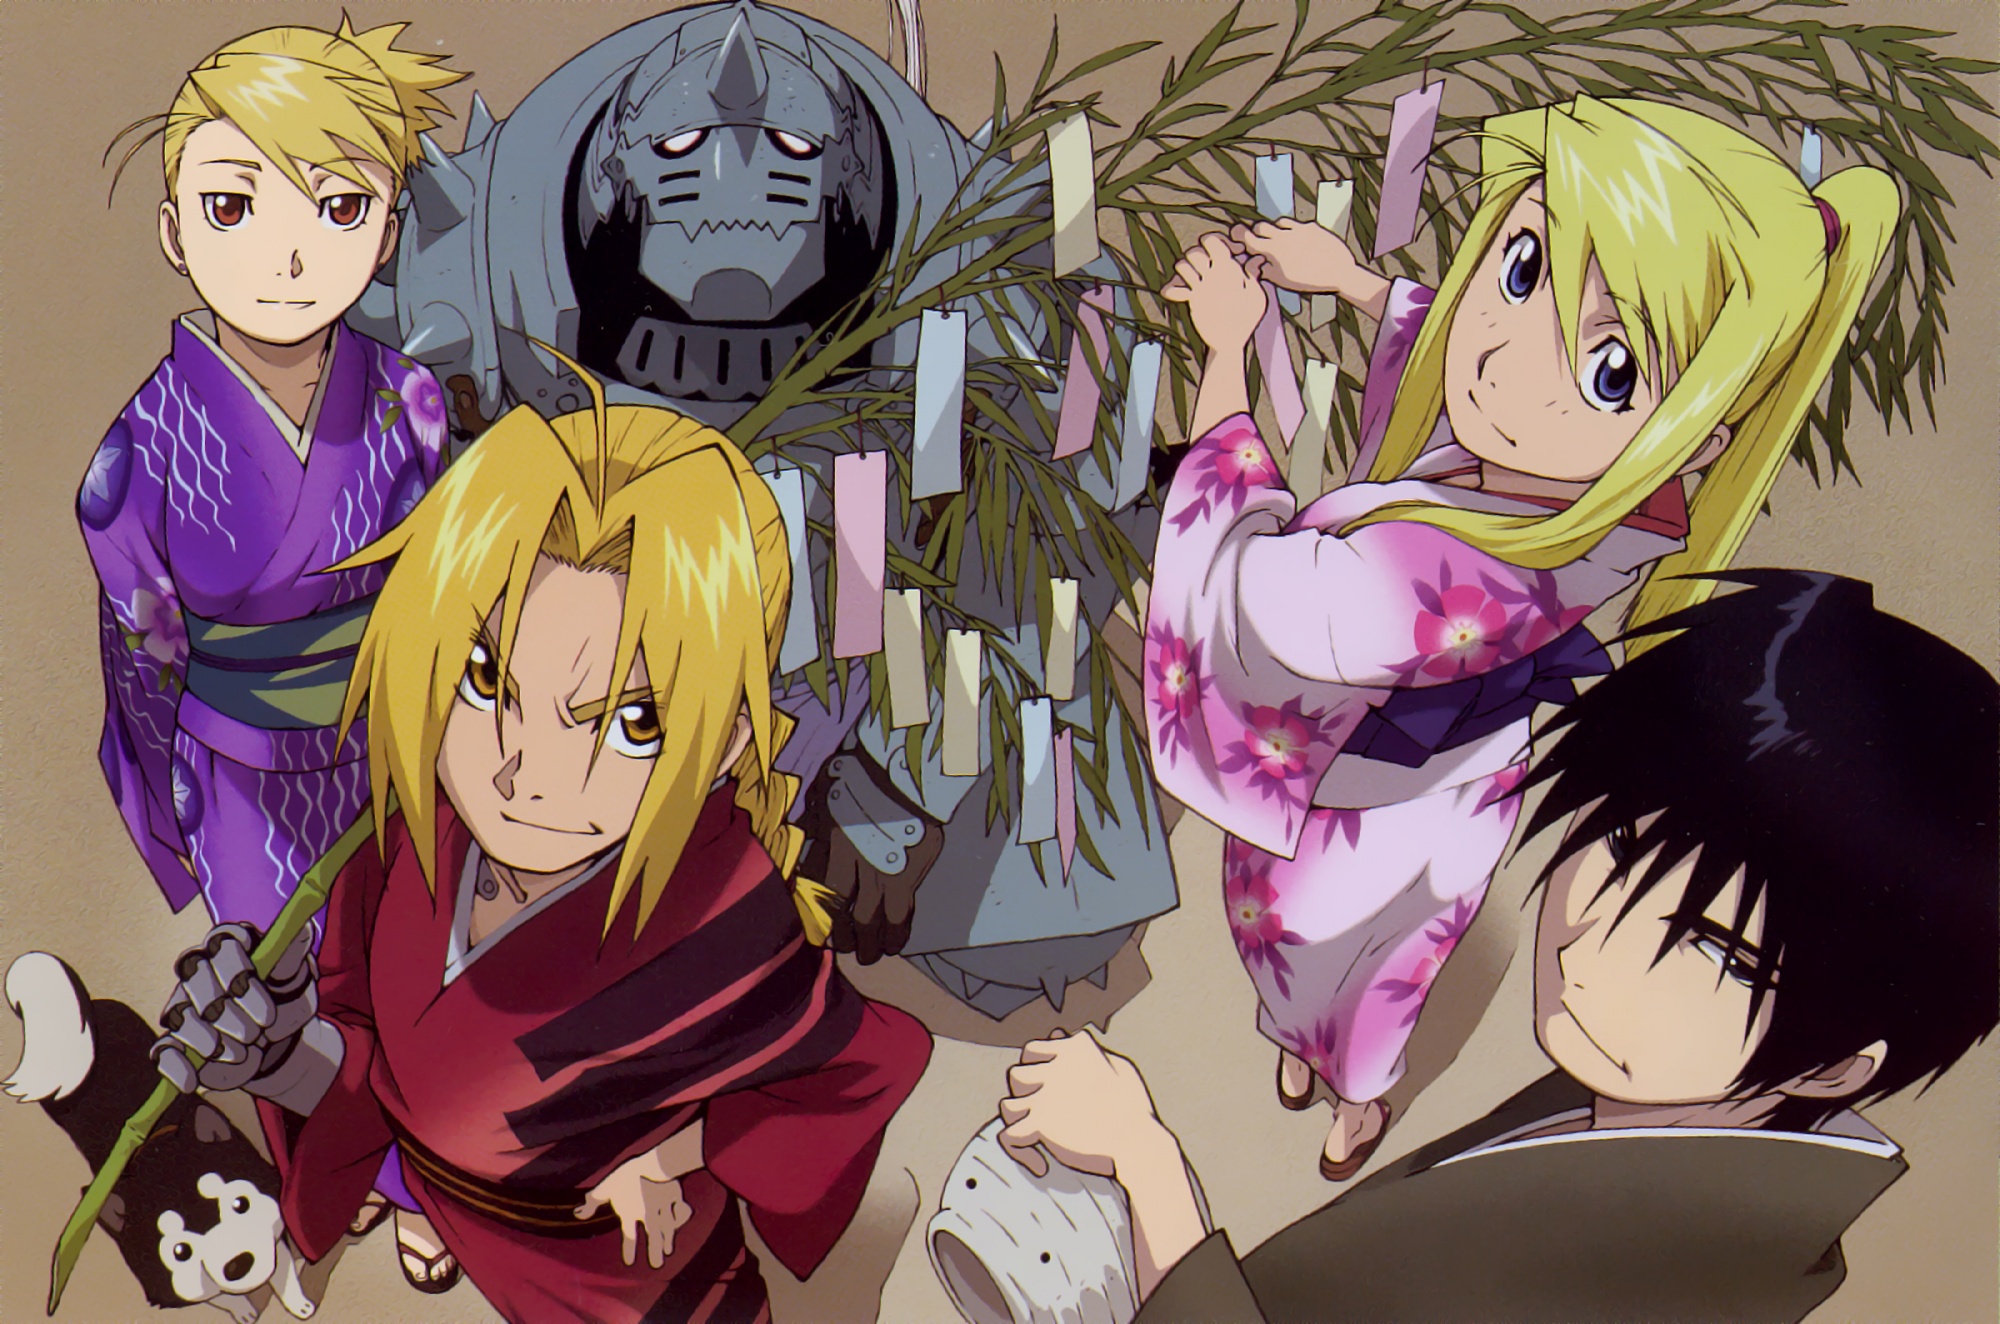 Anime characters from FullMetal Alchemist: Edward, Winry, Alphonse, Roy, and Riza.